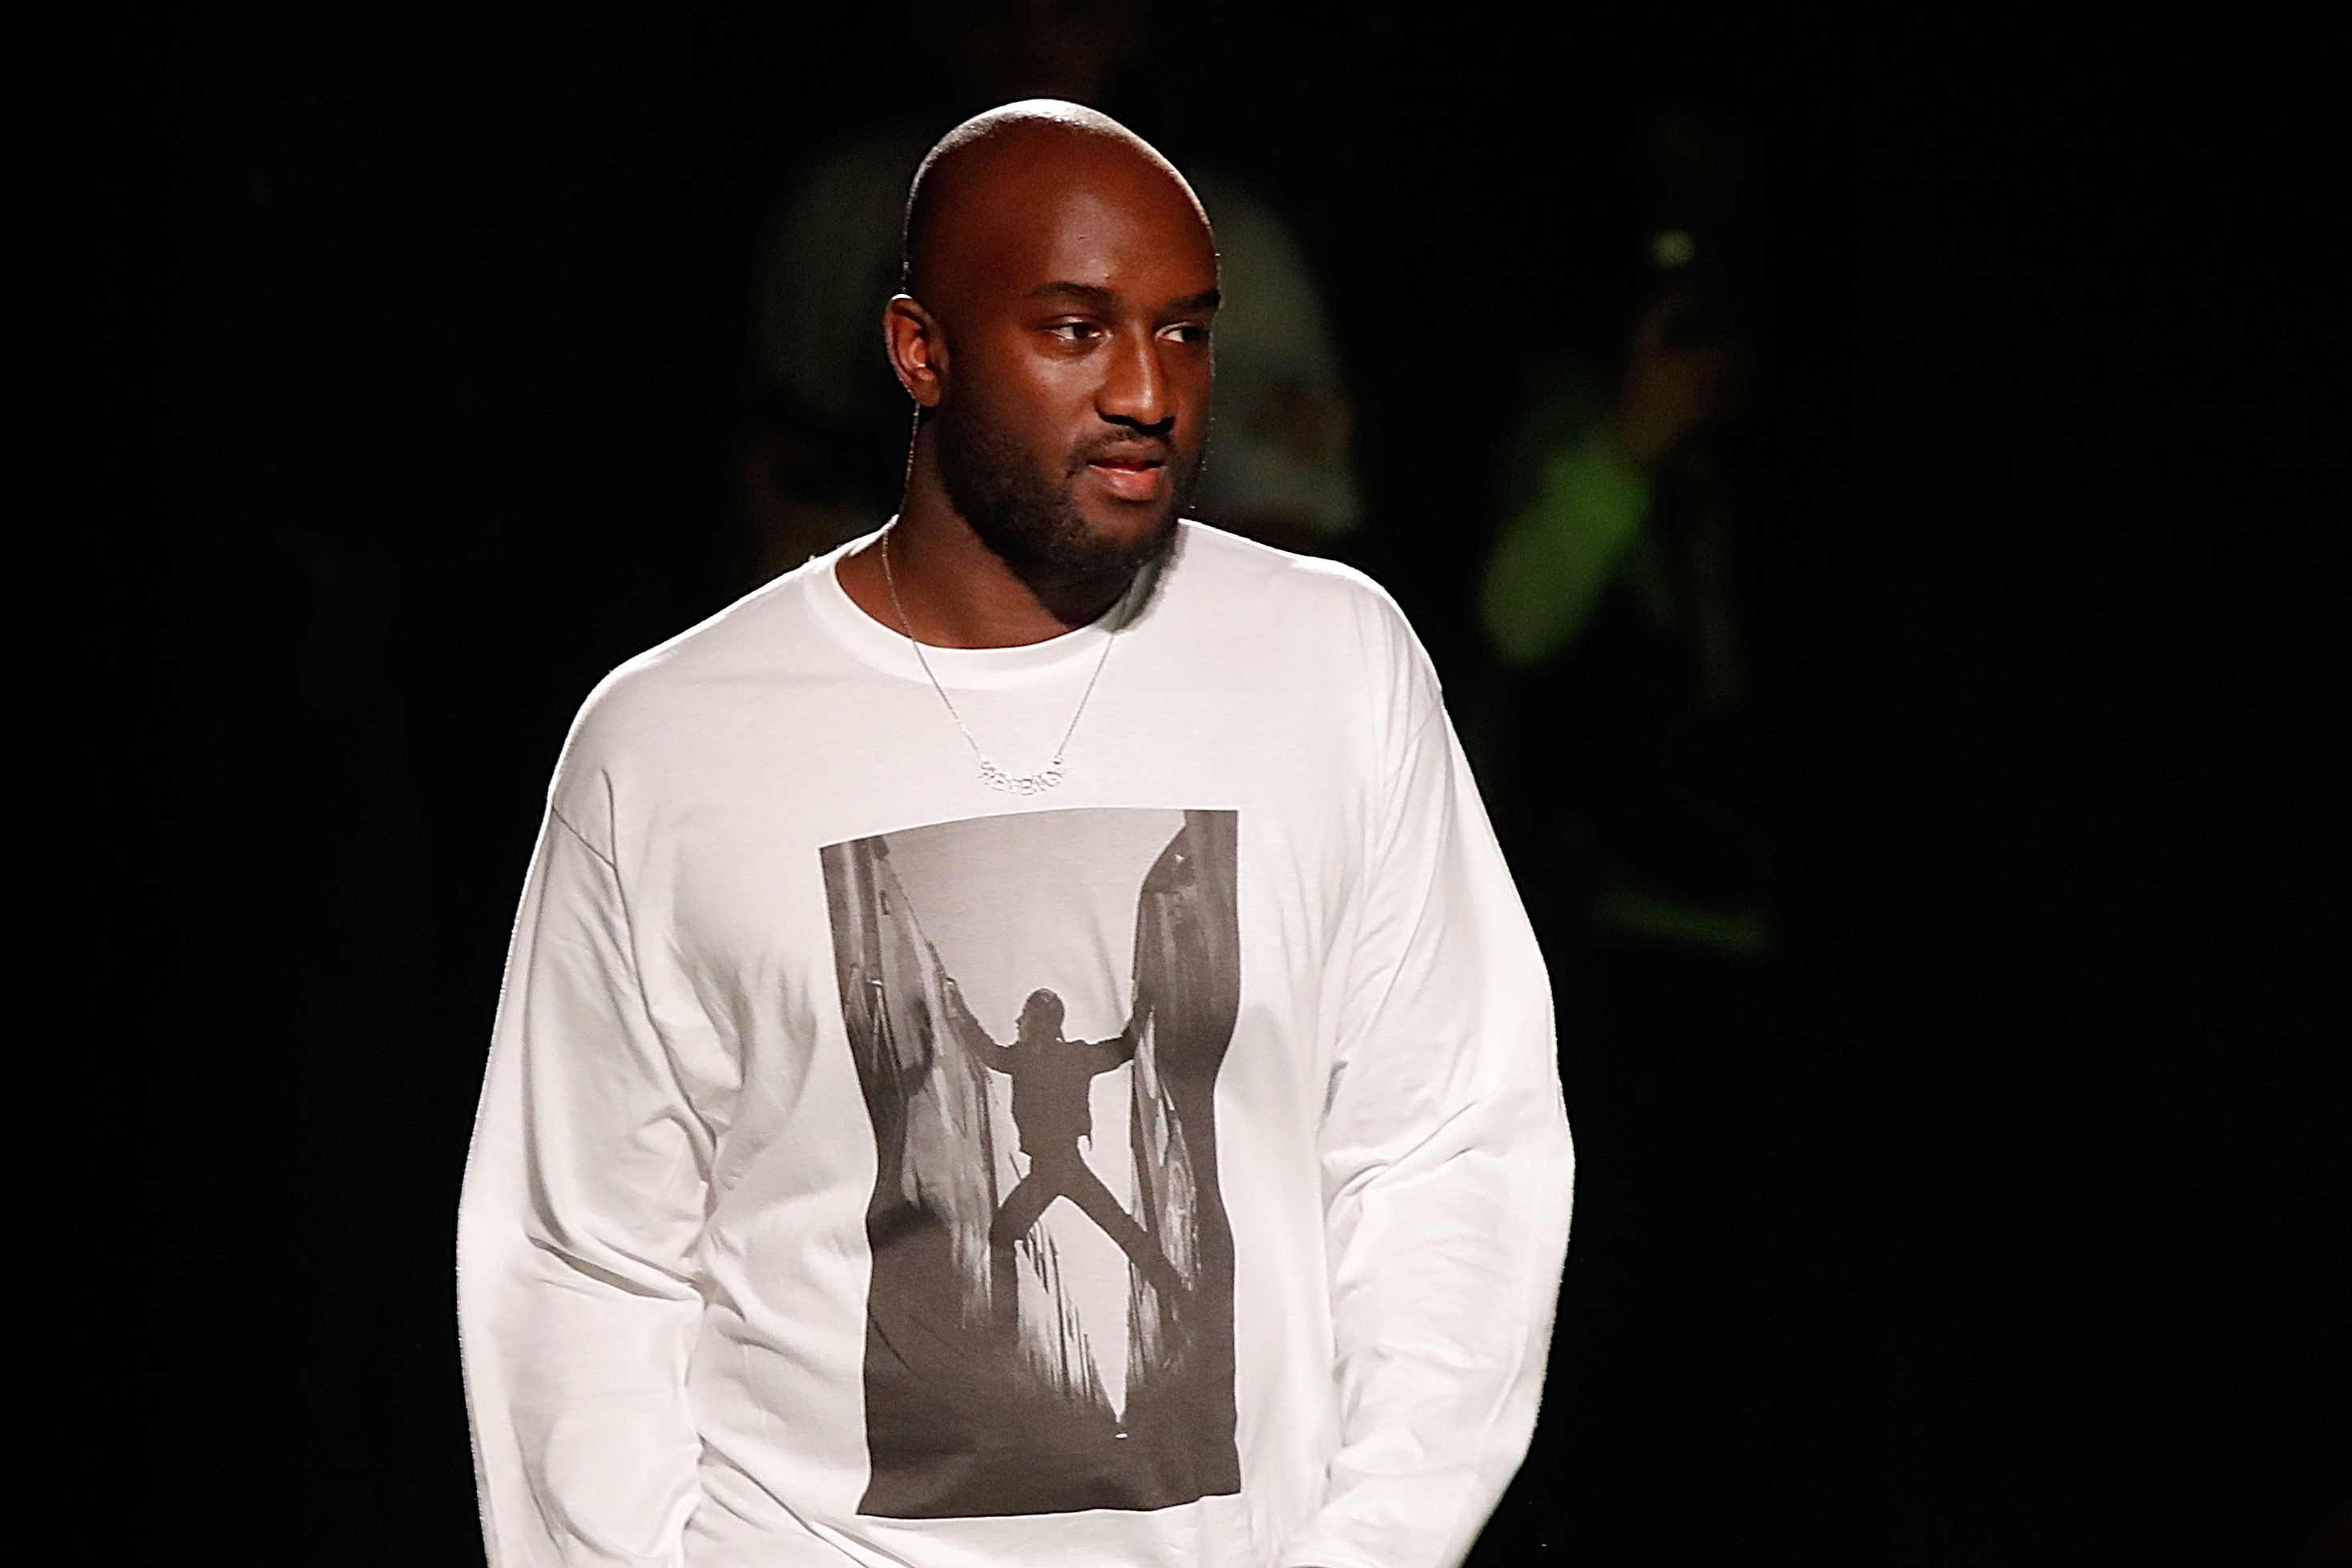 Designer Virgil Abloh appears at the end of his Spring/Summer 2019 collection for Off-white fashion label during Mens’ Fashion Week in Paris, France, June 20, 2018. REUTERS/Charles Platiau